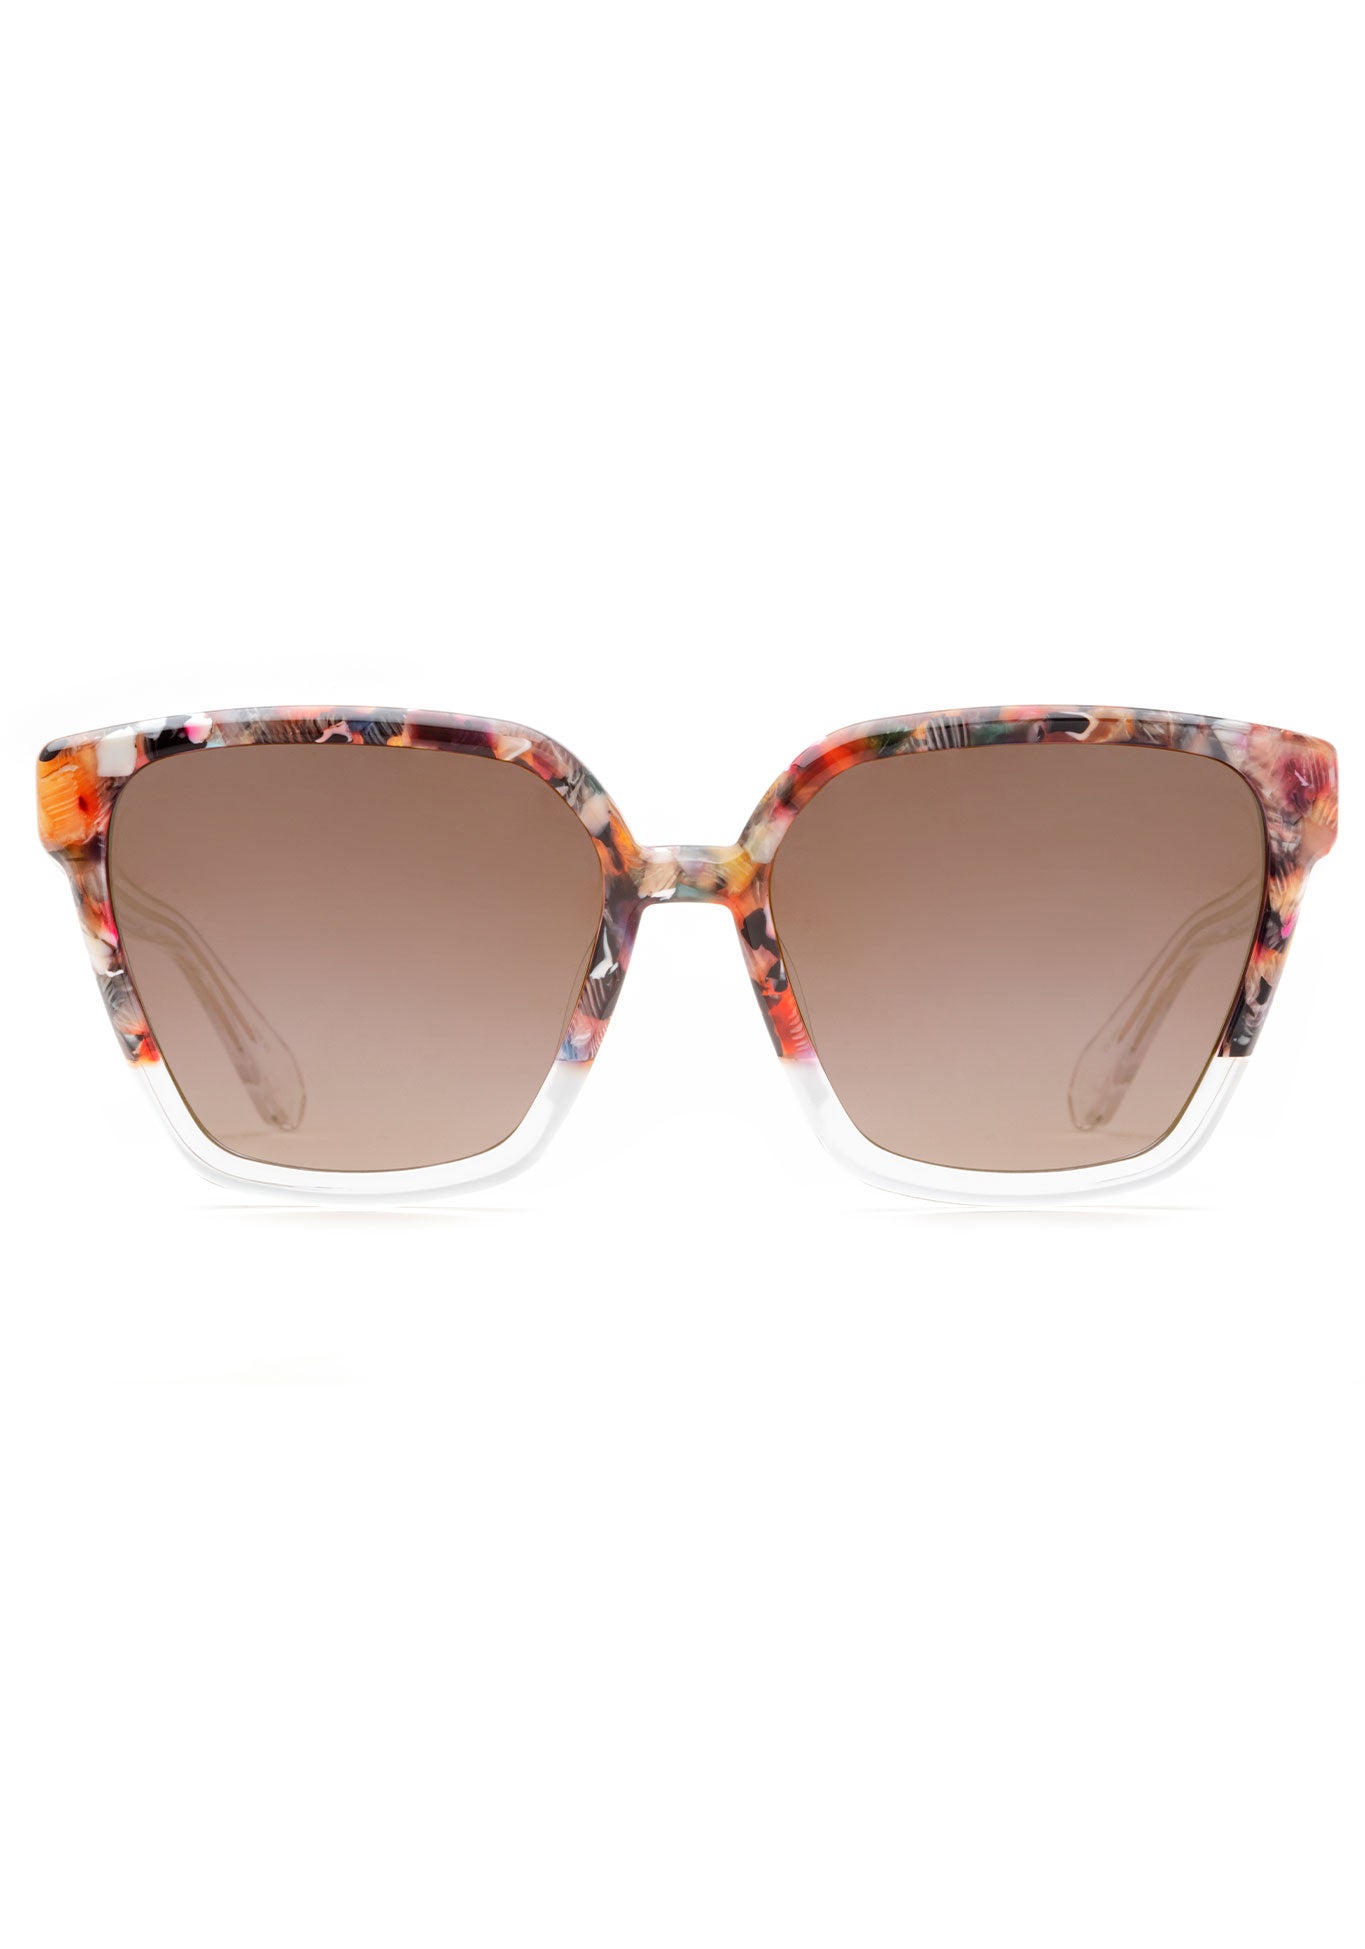 SONIAT | Capri to Crystal 24K Mirrored Handcrafted, luxury colorful acetate KREWE sunglasses